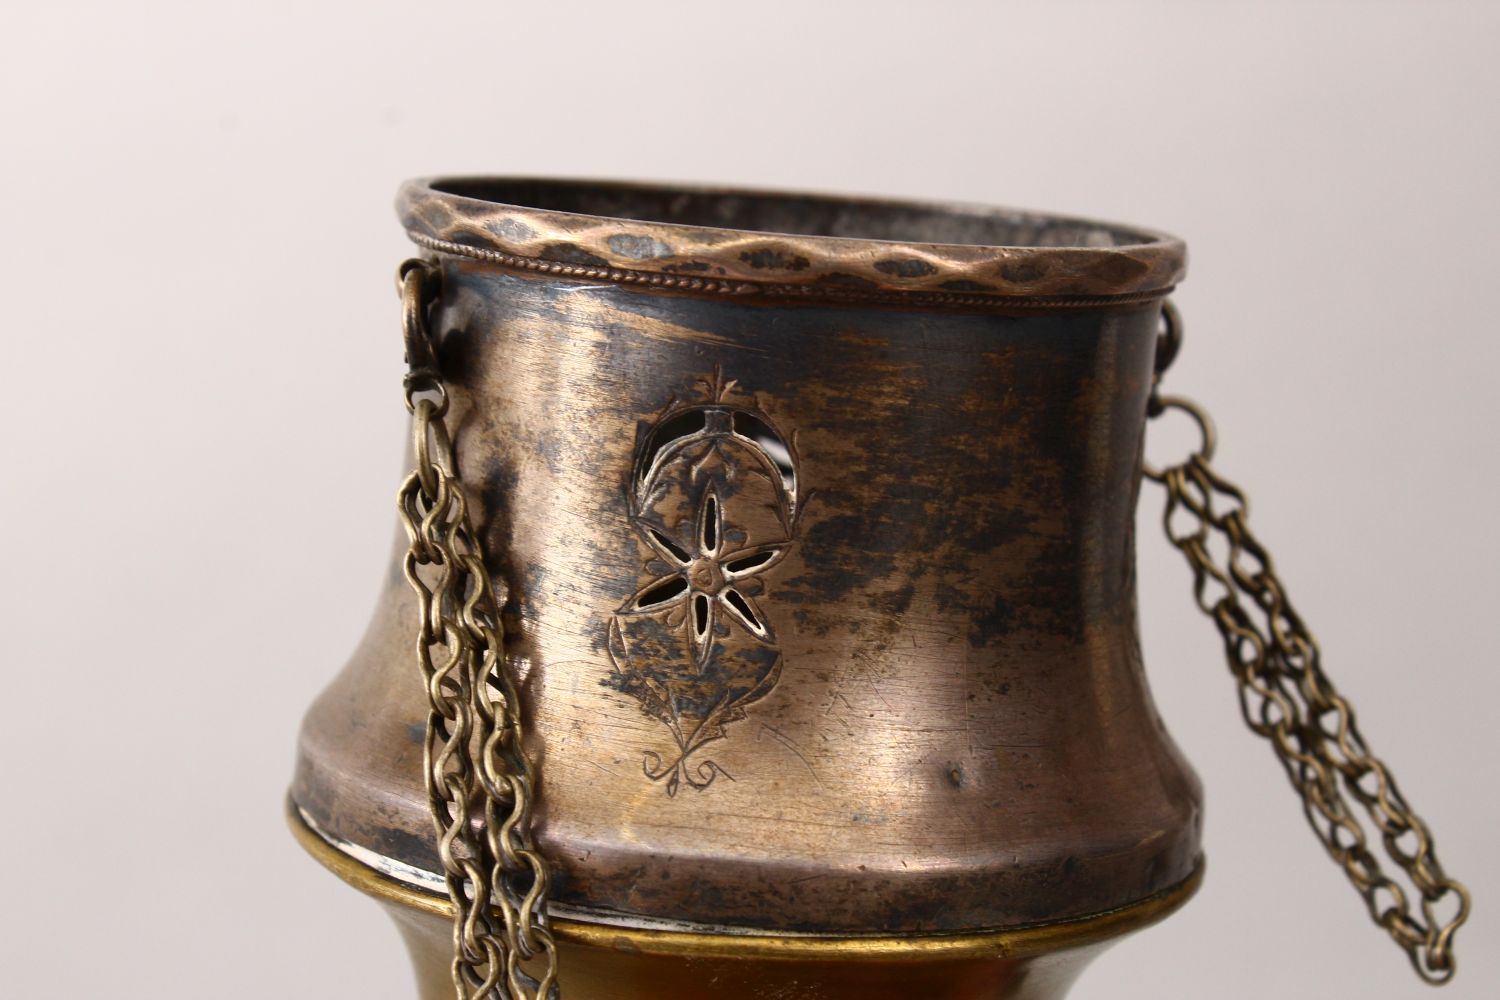 19TH CENTURY PERSIAN QAJAR ISLAMIC BRASS HUQQA TOP WITH A SILVER WIND GUARD, with a wooden sleeve - Image 8 of 10